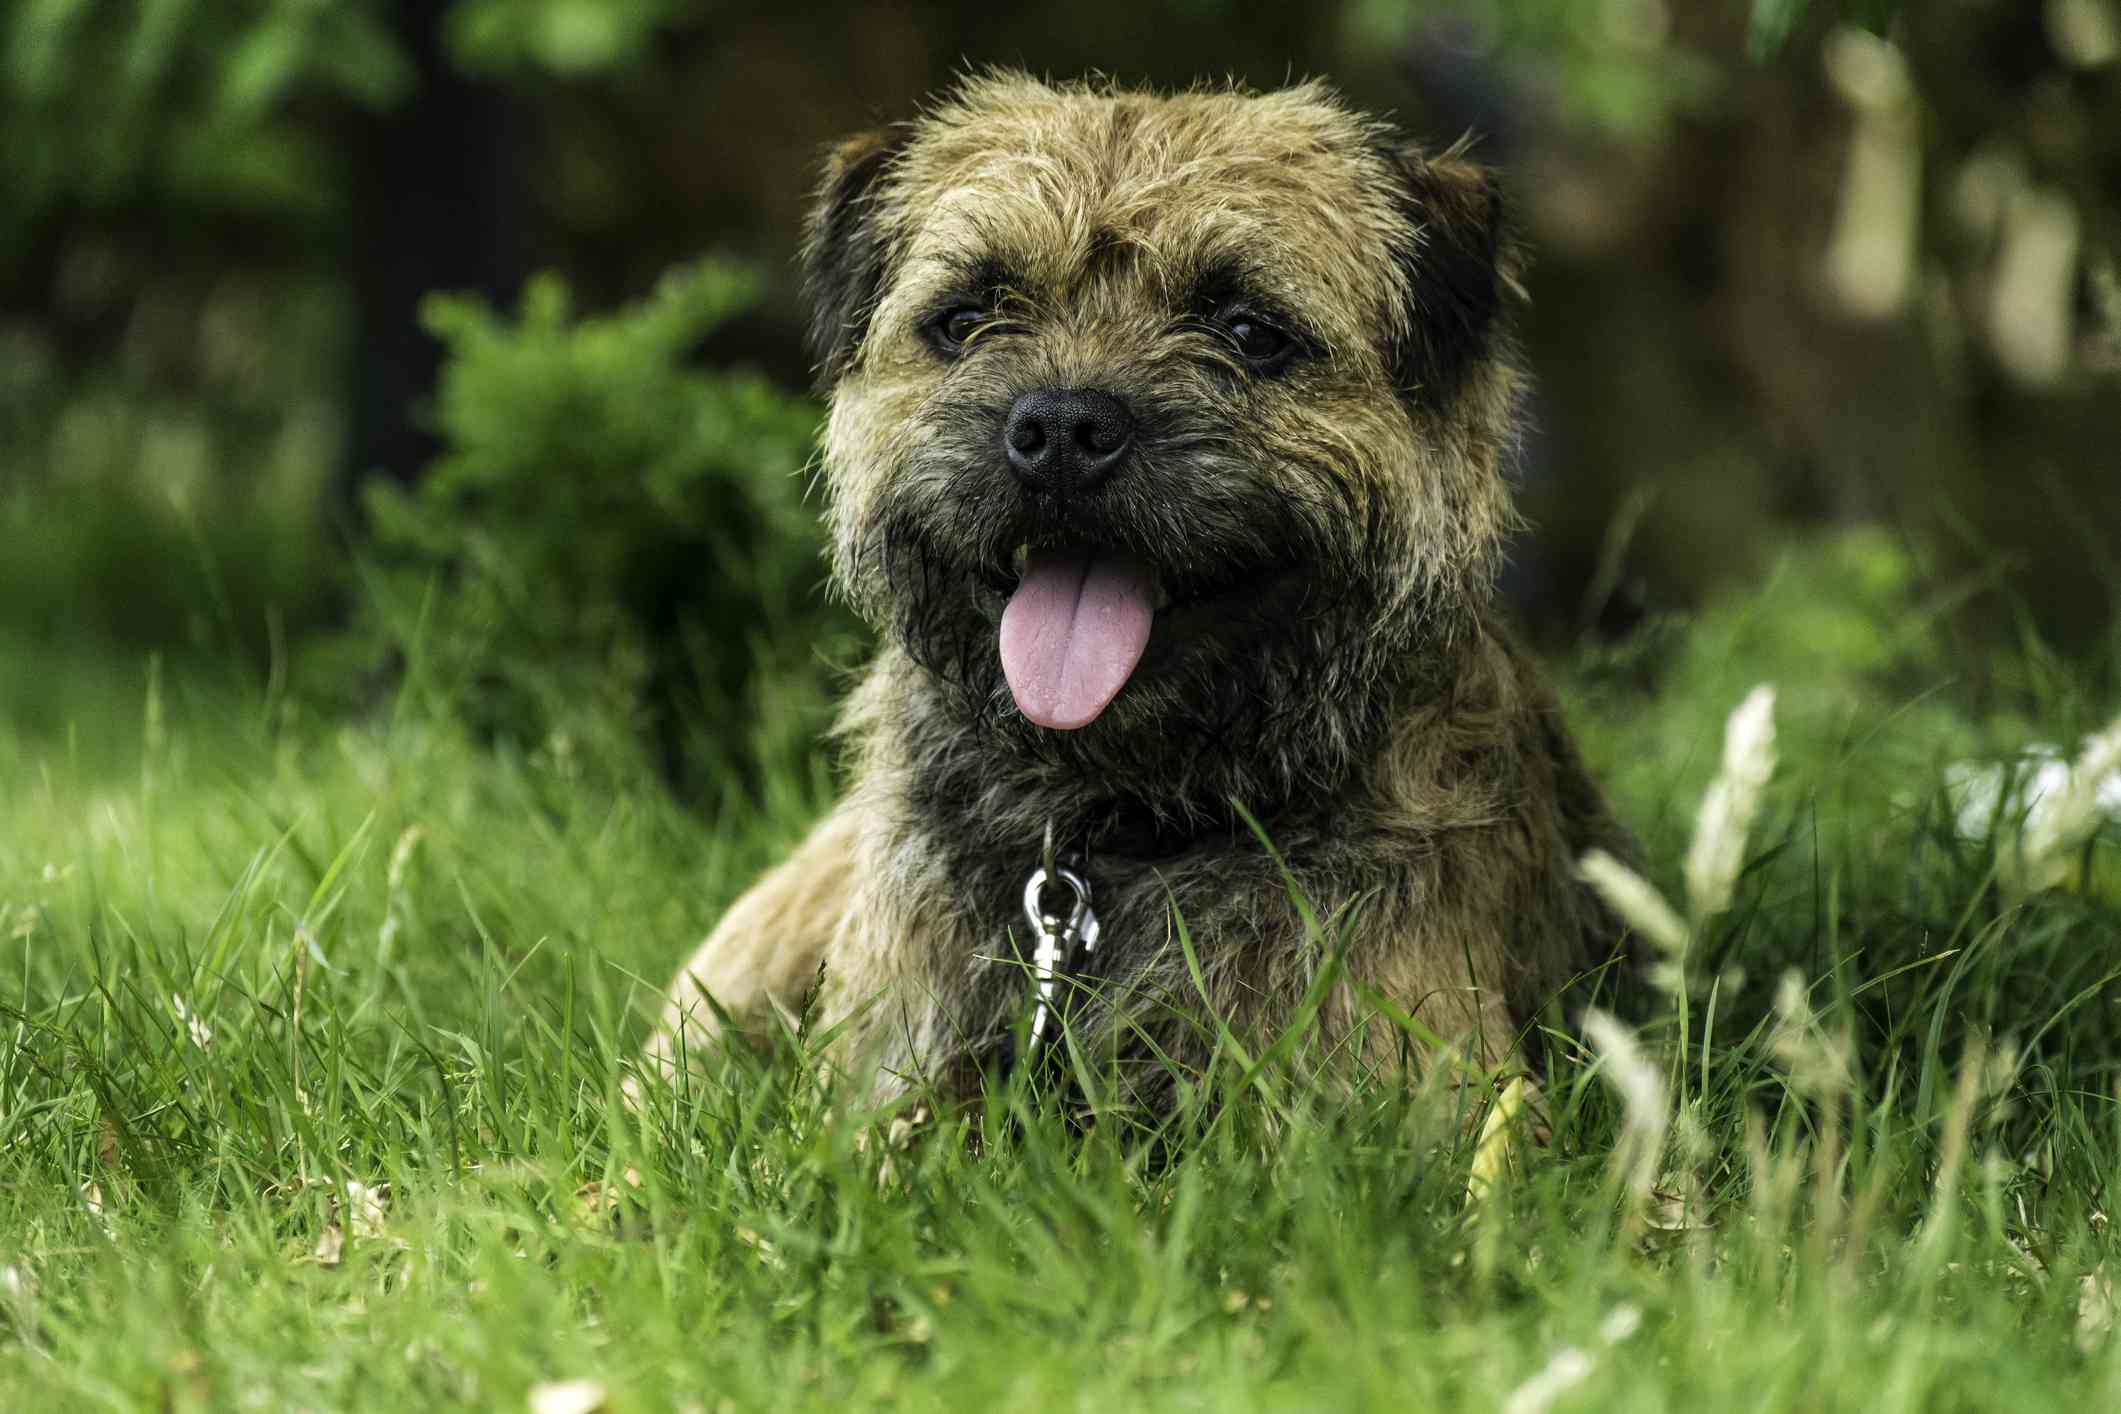 Border Terrier with tongue hanging out sitting in grassy field